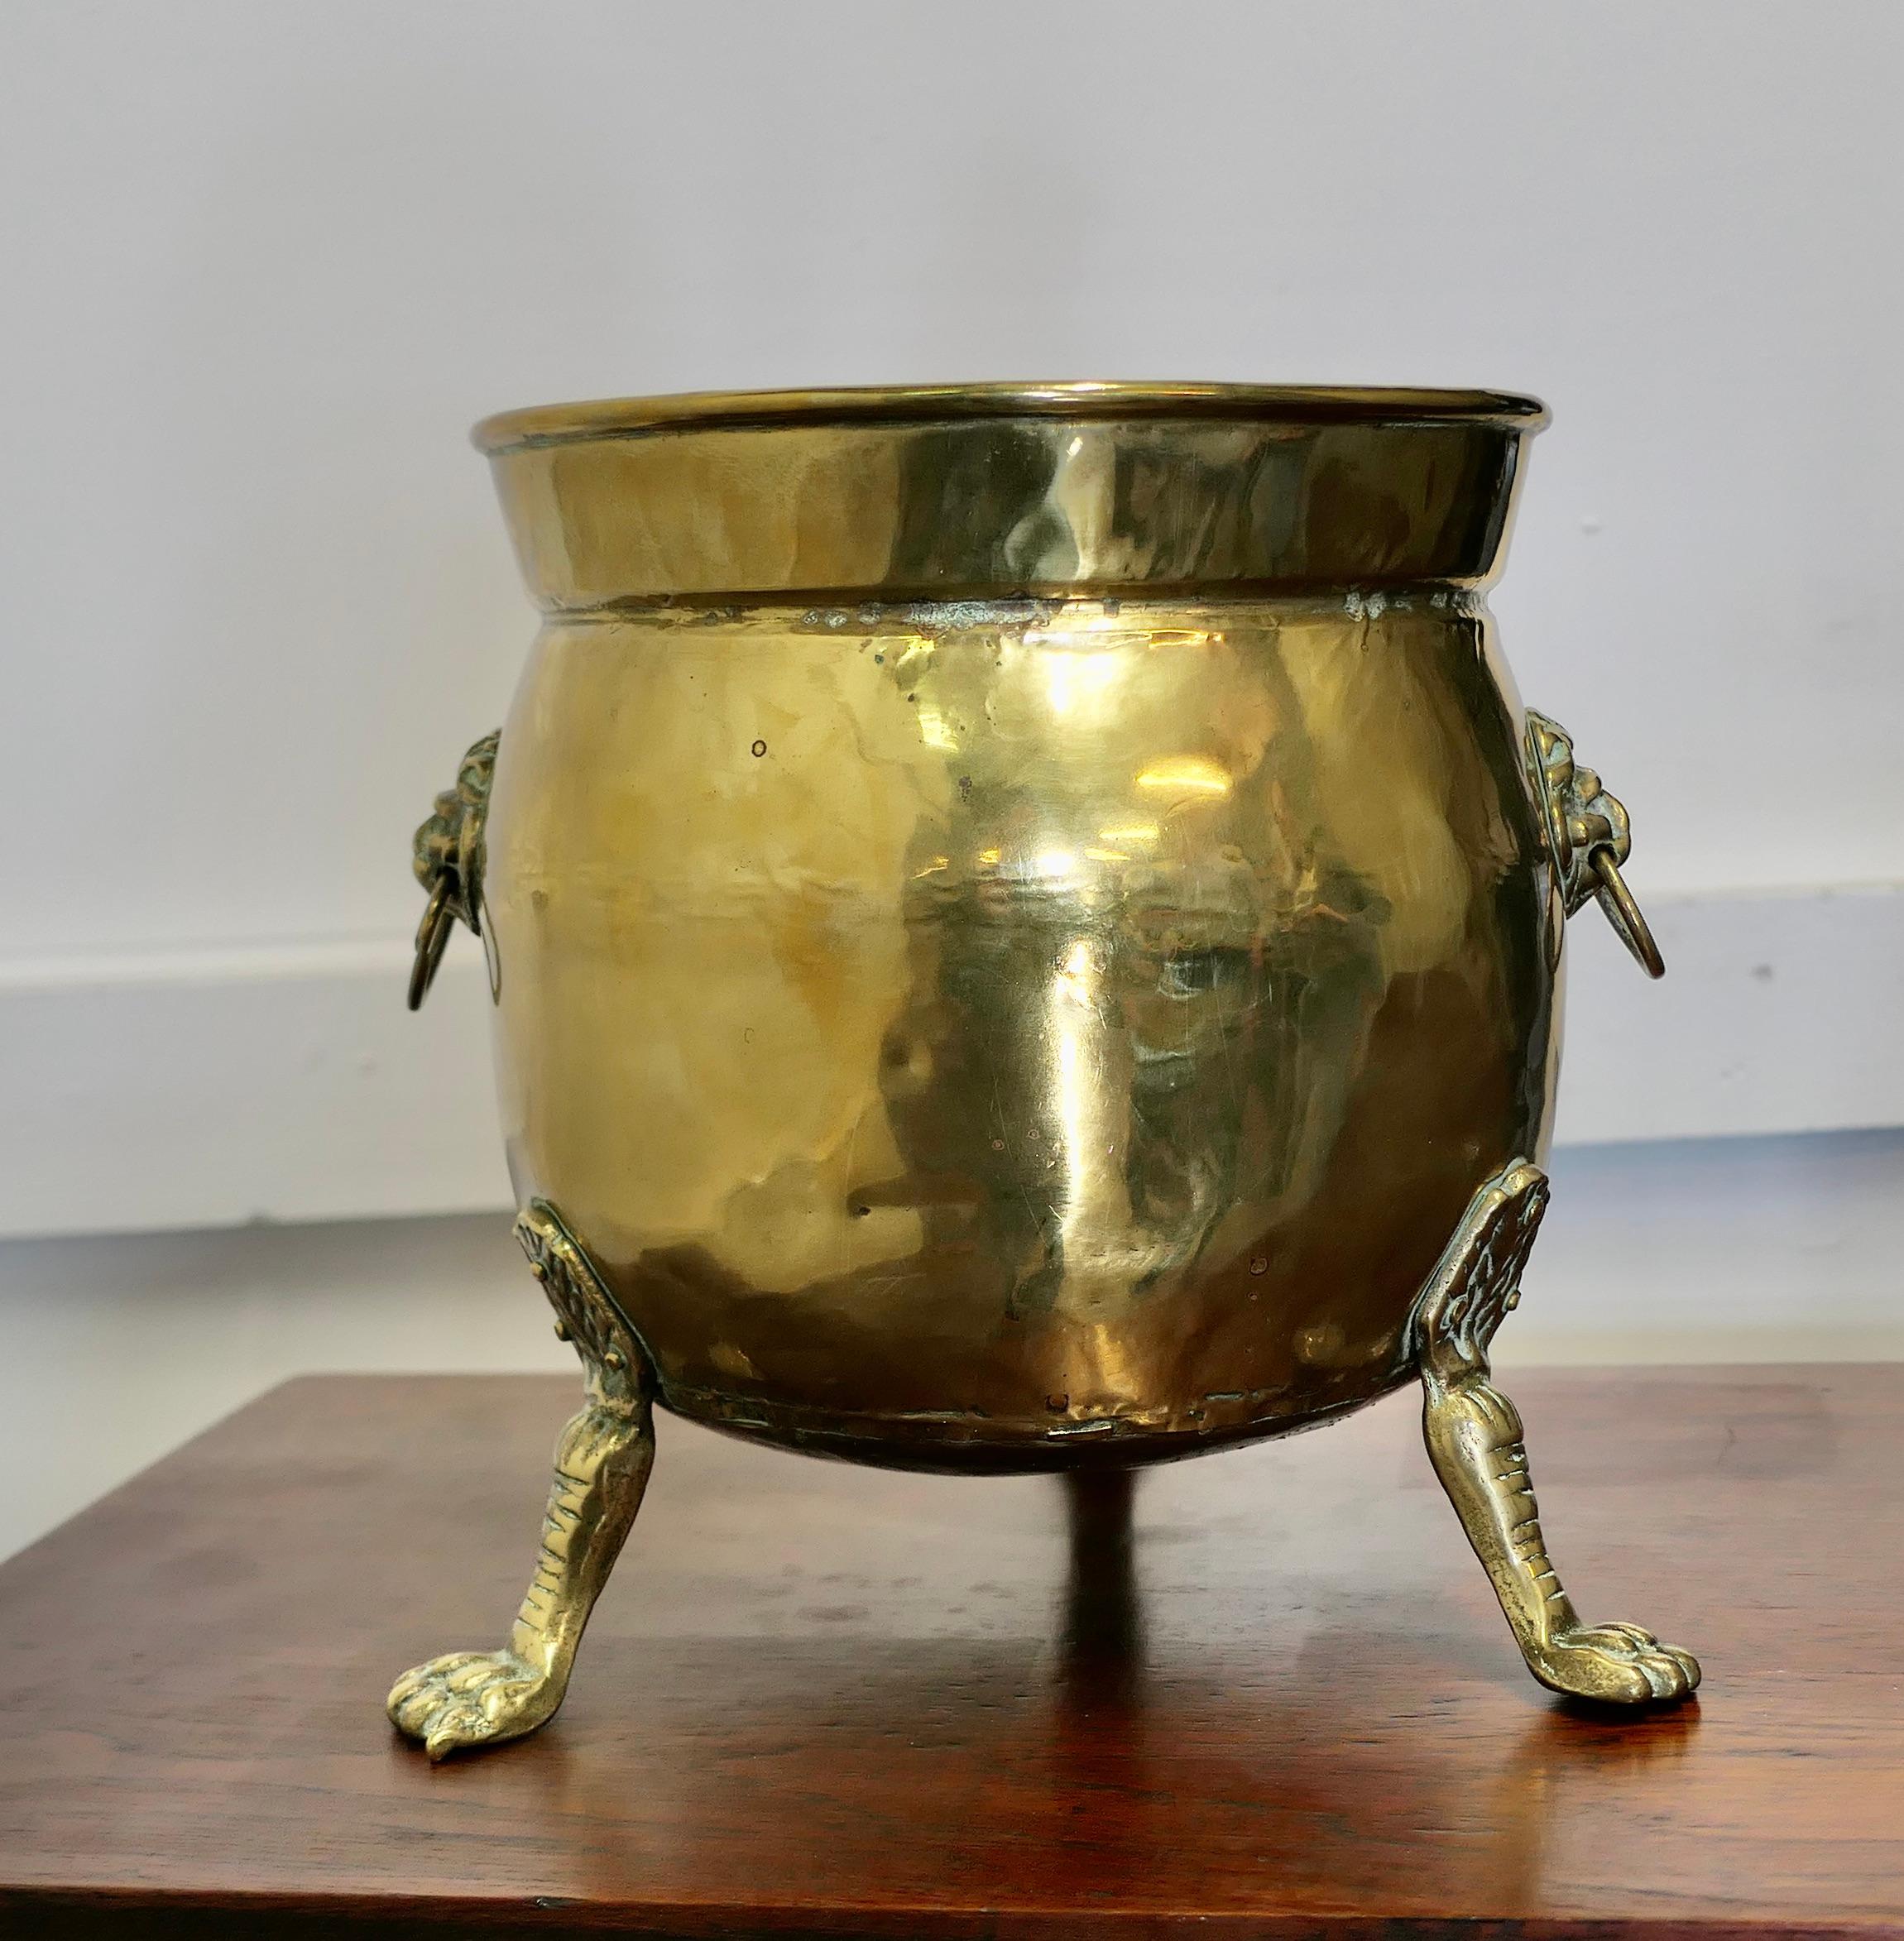 Large Victorian Brass Jardinière with Lions Mask & Hairy Paw Feet  

This a fine quality piece of solid brass hand made craftsmanship, the Jardinière has a rolled top edge, 2 lions mask ring handles and it stands on 3 hairy paw feet. 
This is an